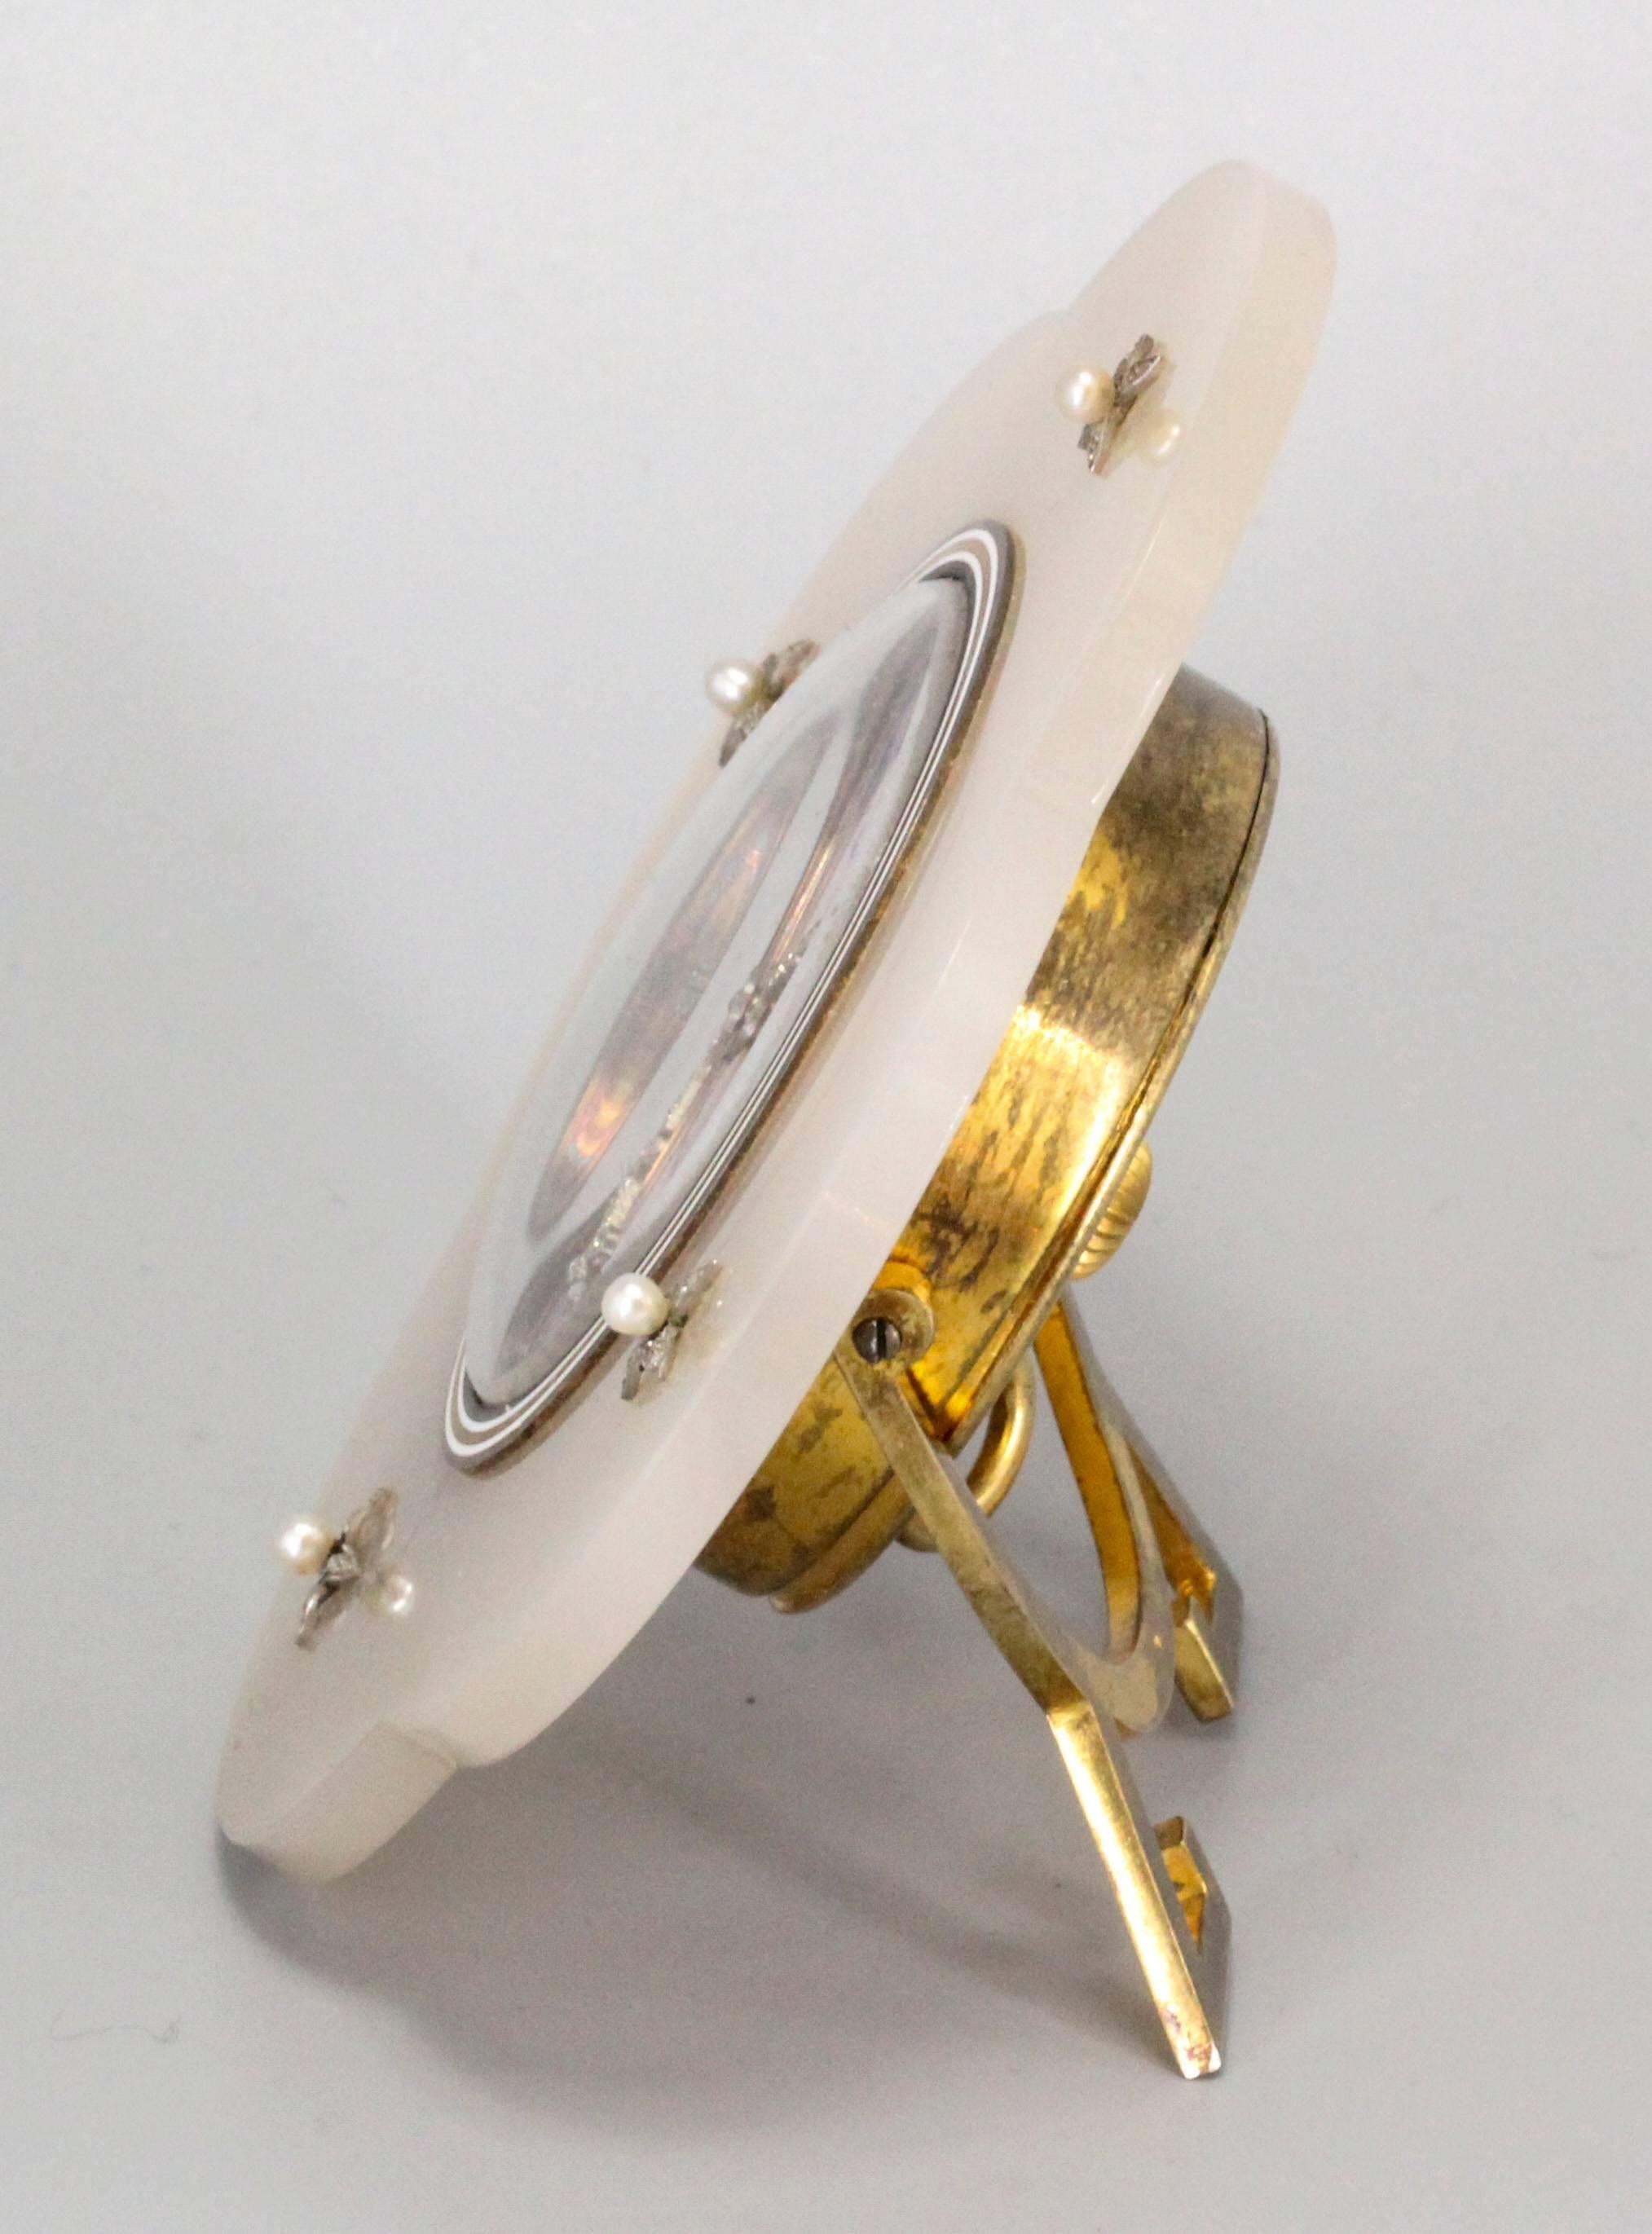 Rare and unusual Art Deco bedside clock by Ugo Frilli. It features an enamel face, with diamonds set platinum hands. Body is made of agate, with small seed pearl accents along with diamonds around them set in platinum, the case made in gilt silver.